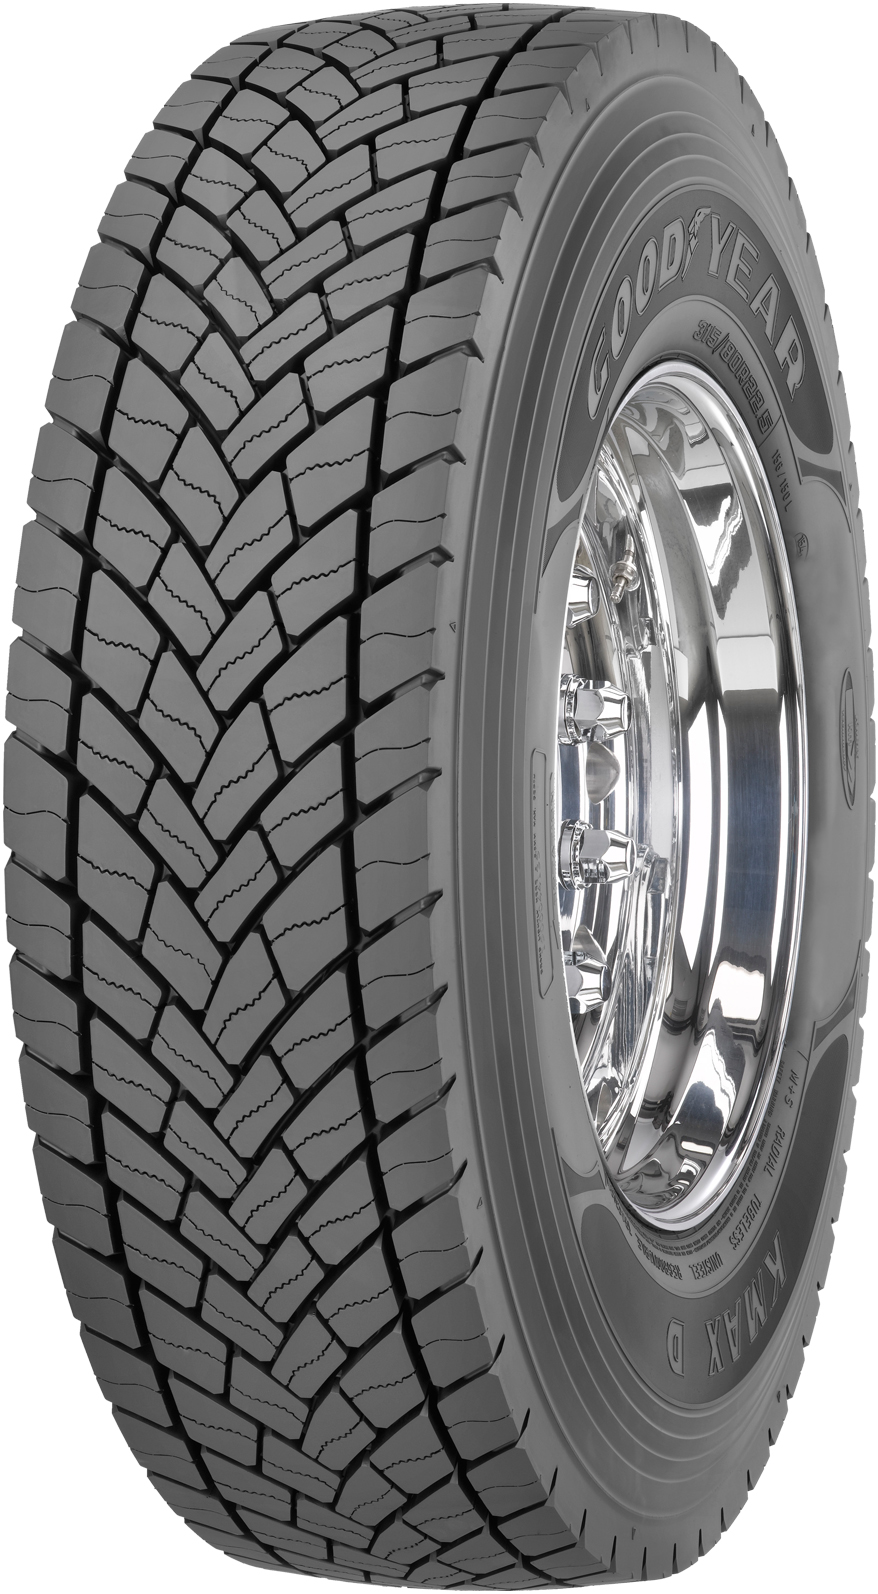 product_type-heavy_tires GOODYEAR KMAX D 12 TL 225/75 R17.5 129M